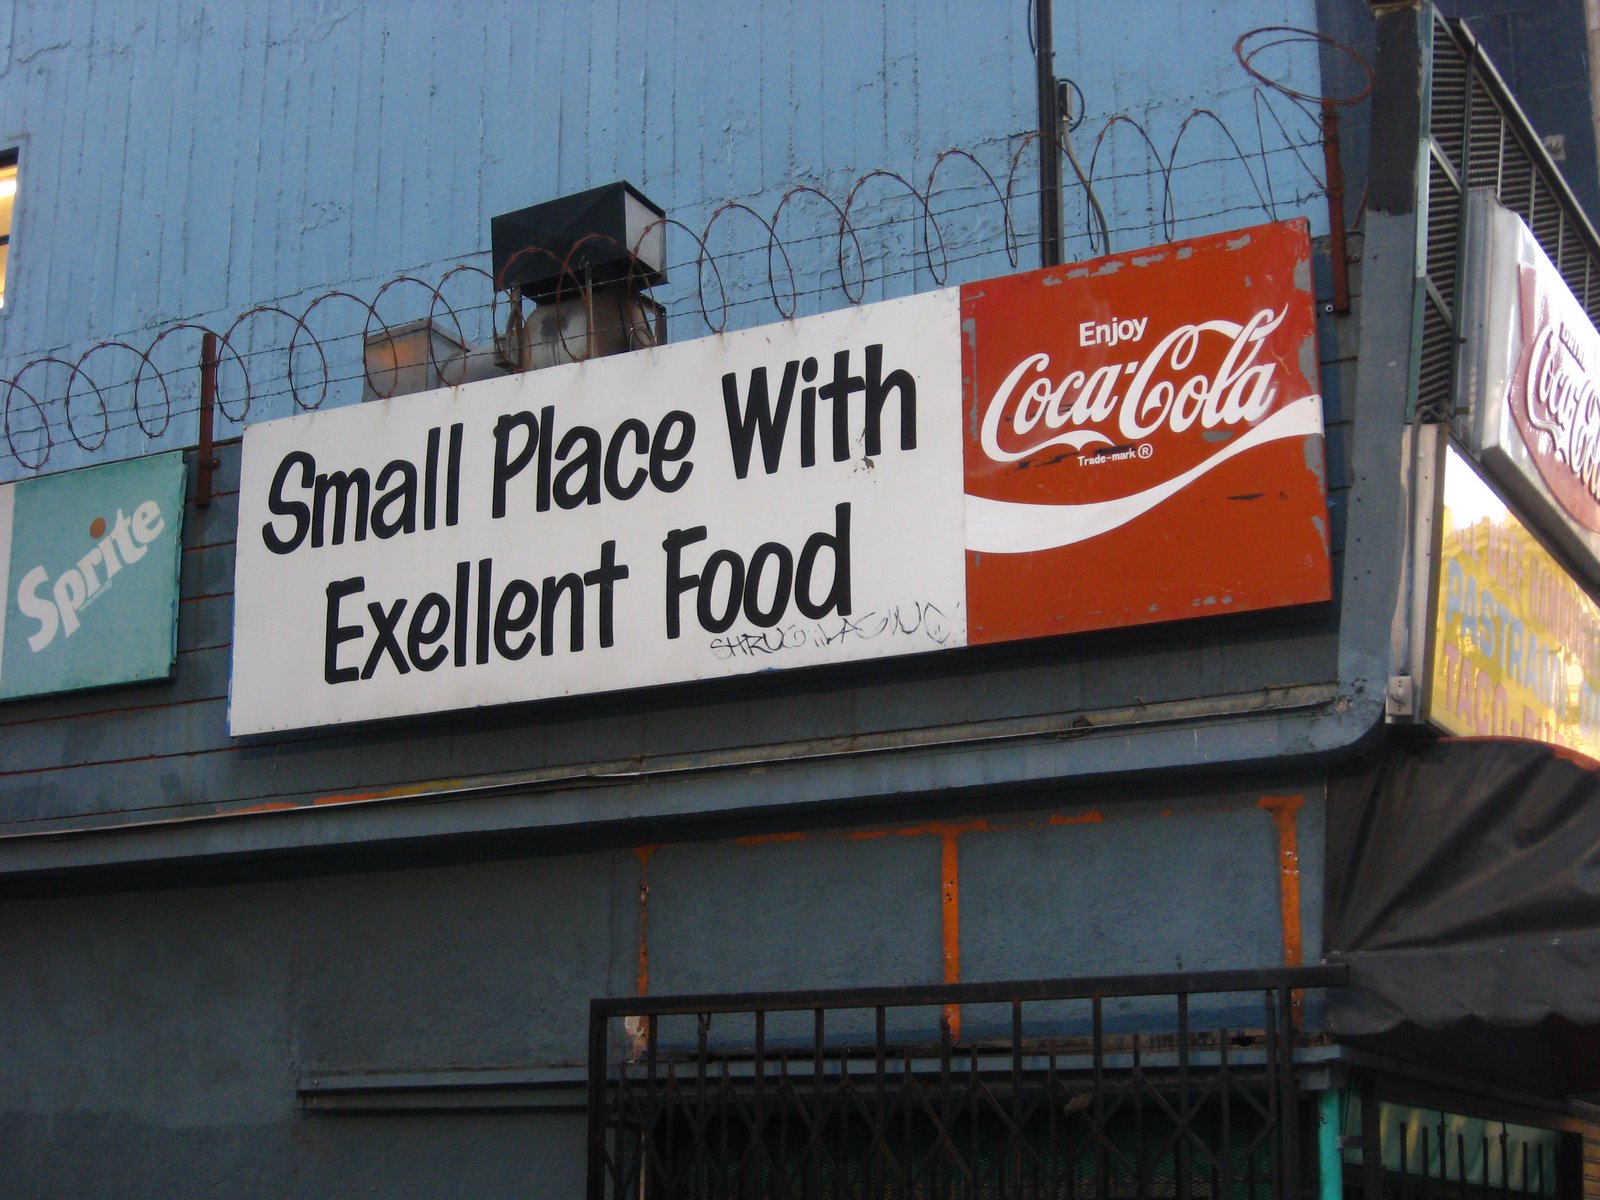 [Small+place+excellent+food.jpg]